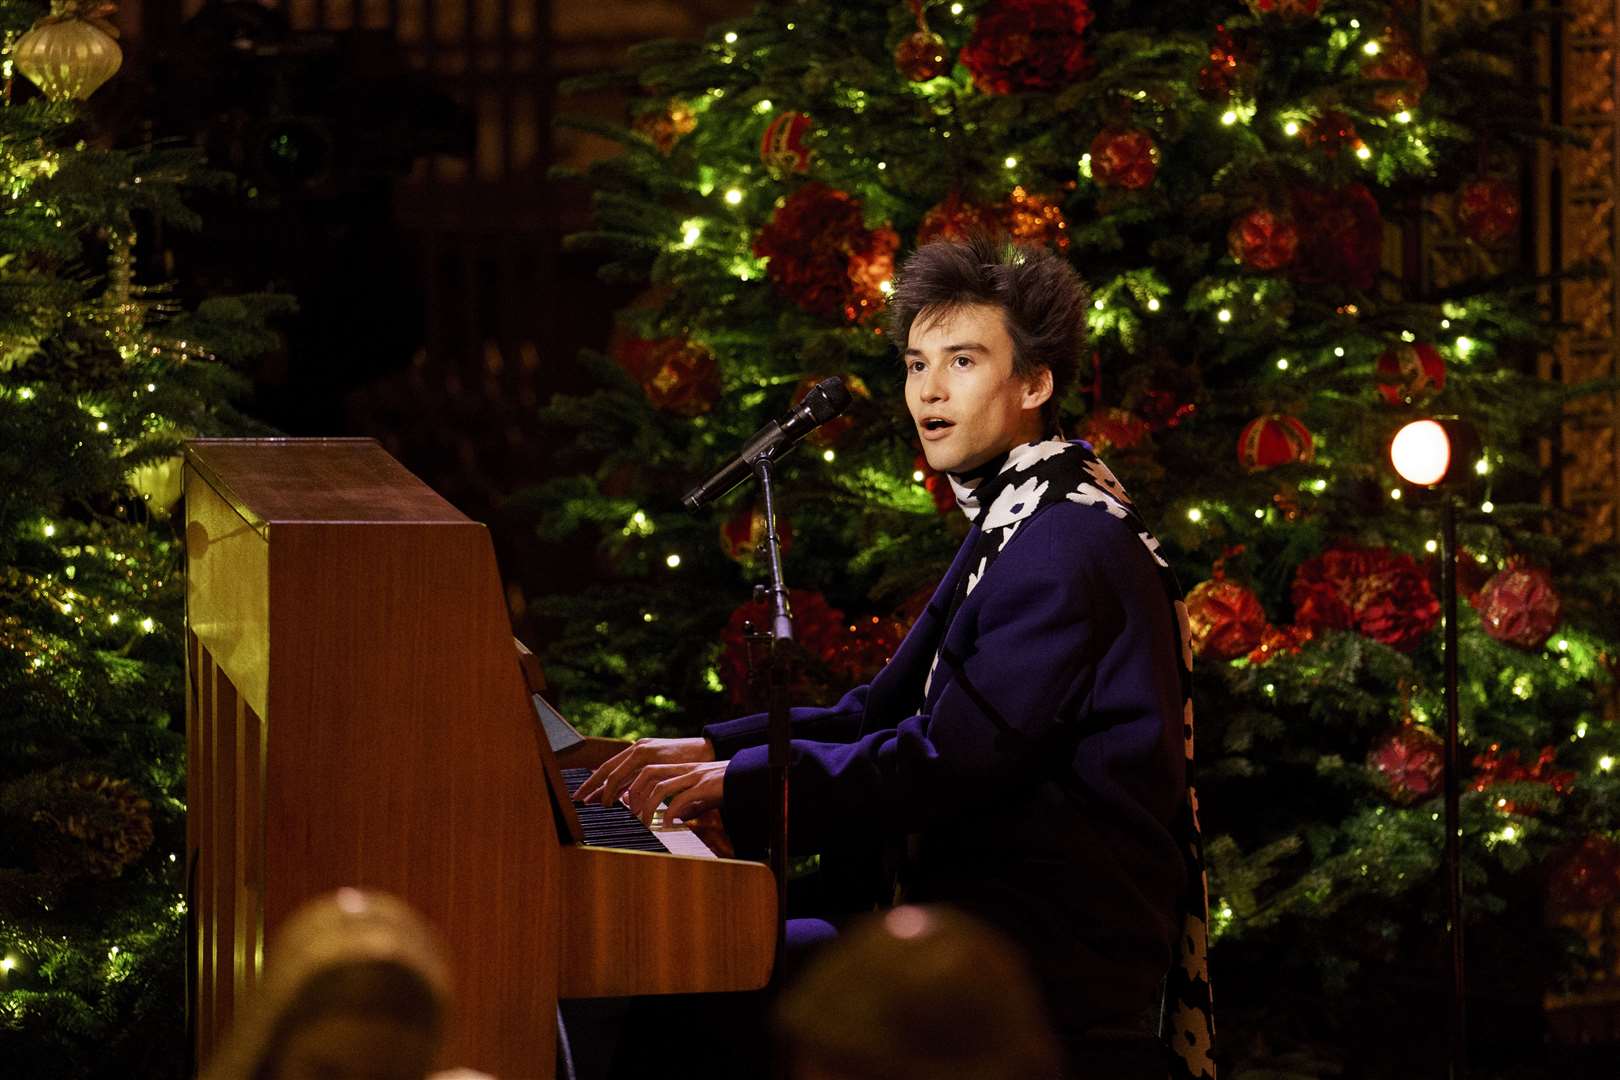 Jacob Collier performs during the Royal Carols: Together At Christmas service at Westminster Abbey on John Lennon’s former piano (Jordan Pettitt/PA)